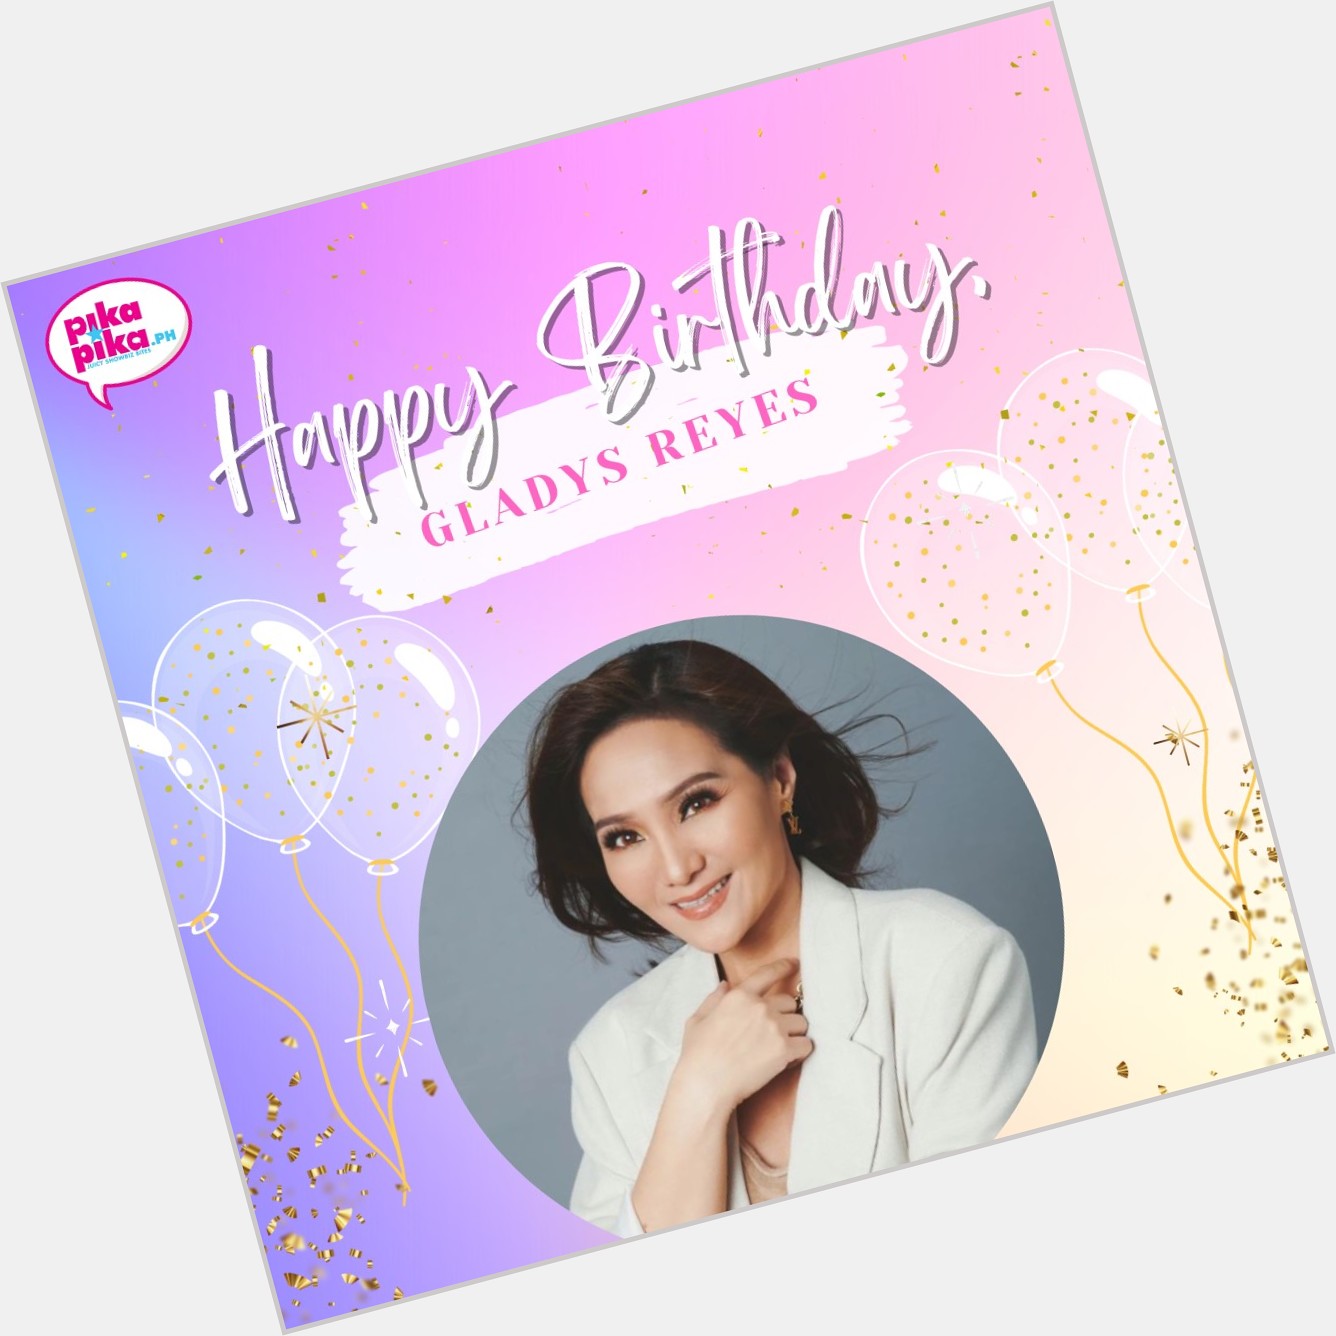 Happy birthday, Gladys Reyes! May your special day be filled with love and cheers.    